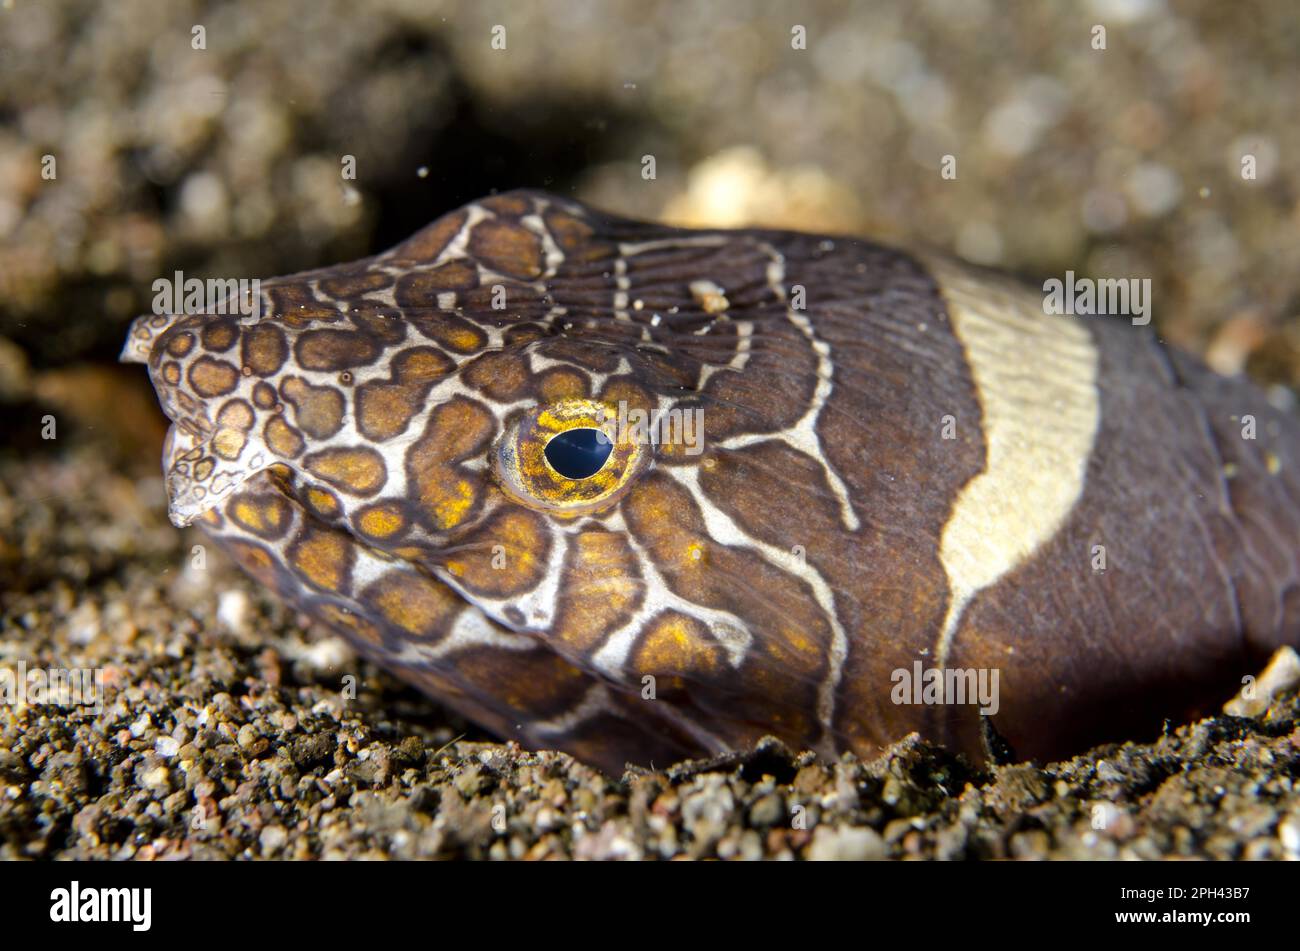 Adult napoleon snake eel (Ophichthus bonaparti), close-up of the head, at the entrance of the burrow in the sand, Horseshoe Bay, Nusa Kode, Rinca Stock Photo